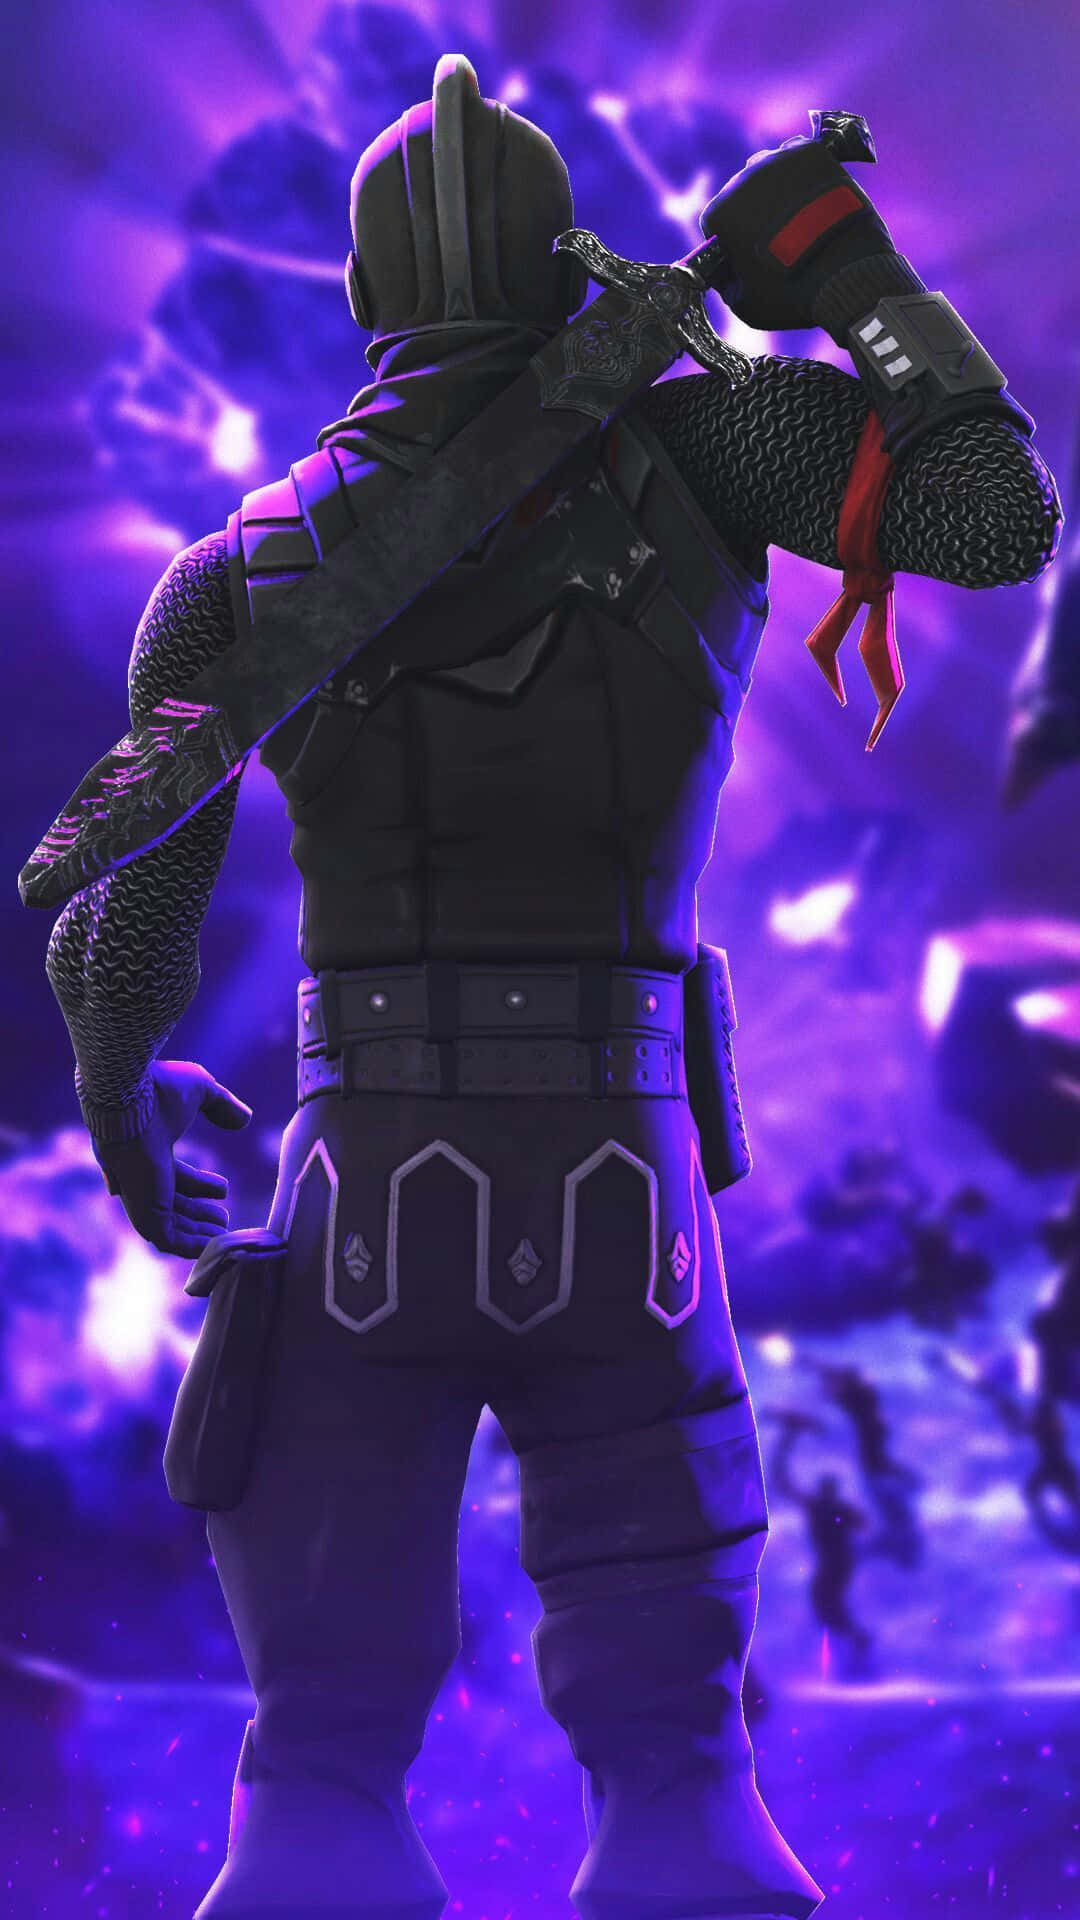 “Ain't nothing like surviving from the storm in Dope Fortnite!” Wallpaper